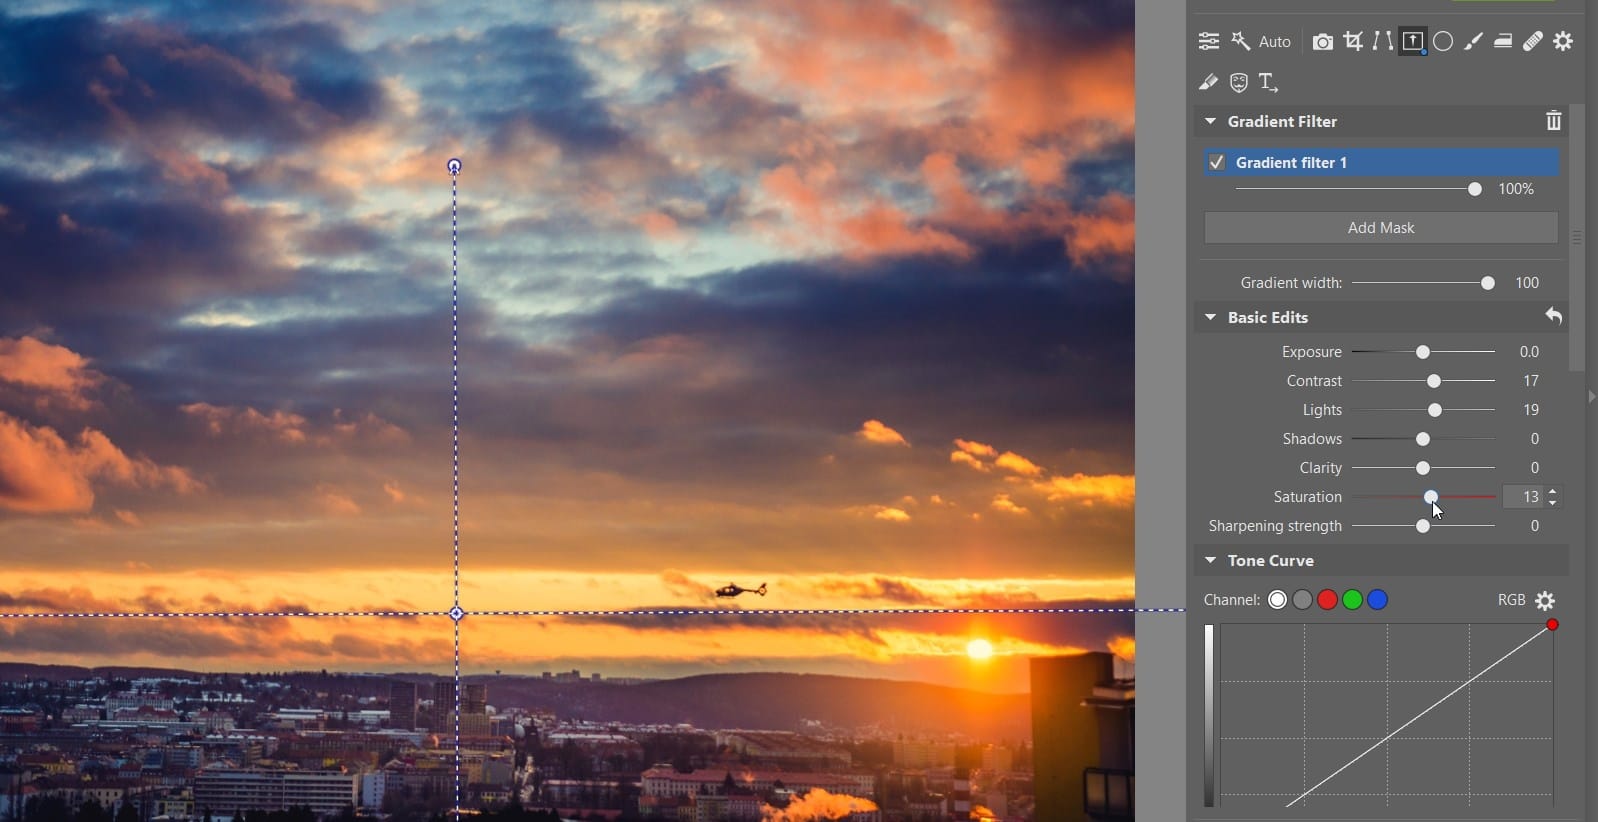 How to use the Gradient Filter when editing your photographs